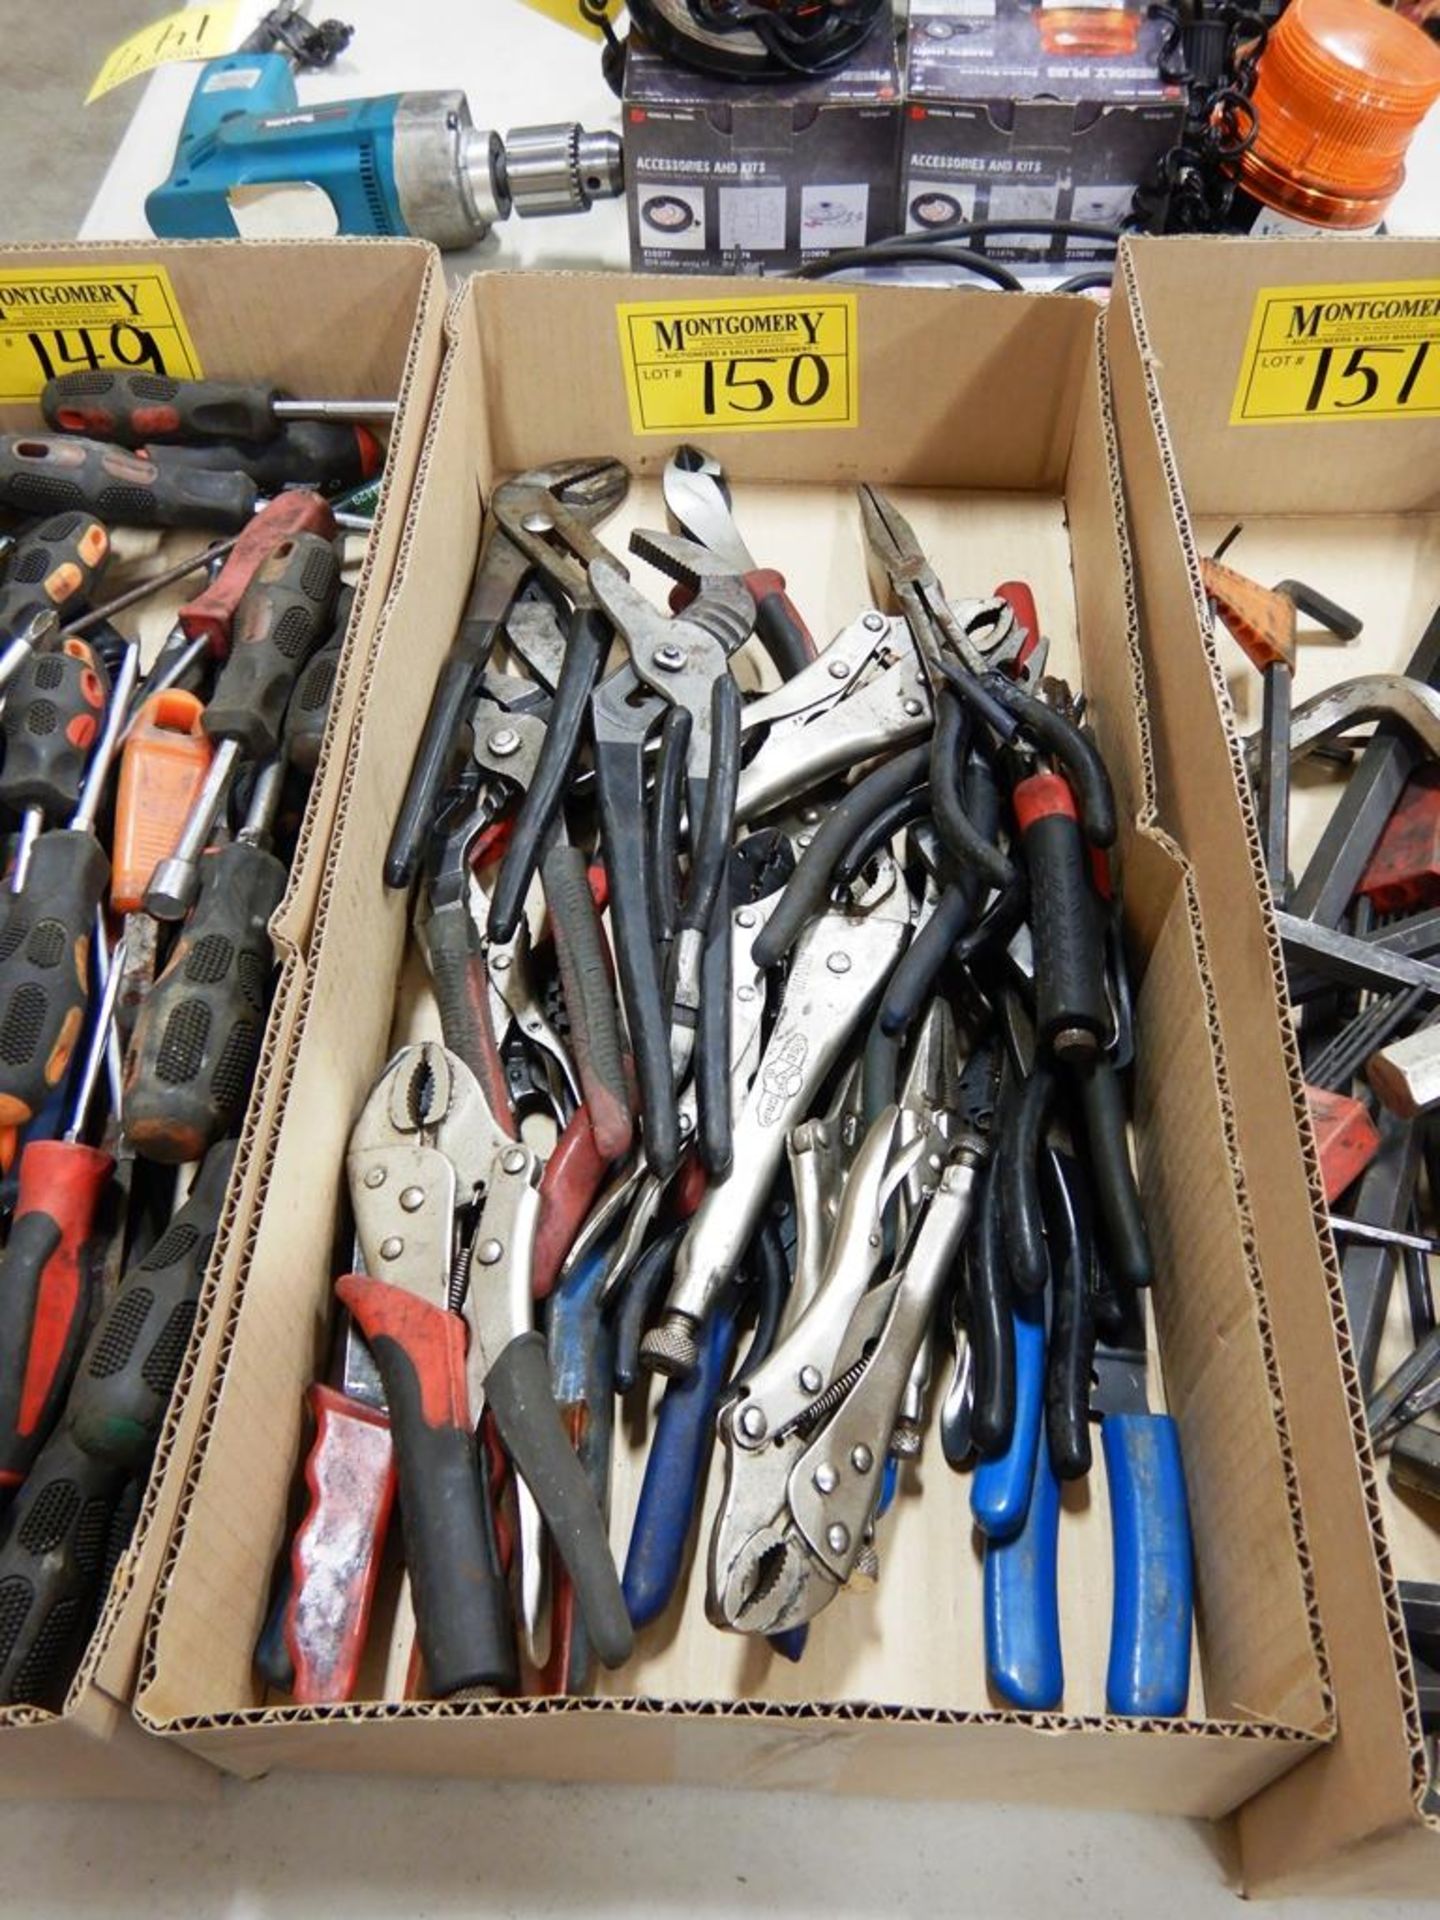 L/O ASSORTED VISE GRIPS, PLIERS, SNIPS, CRIMPING TOOLS, ETC